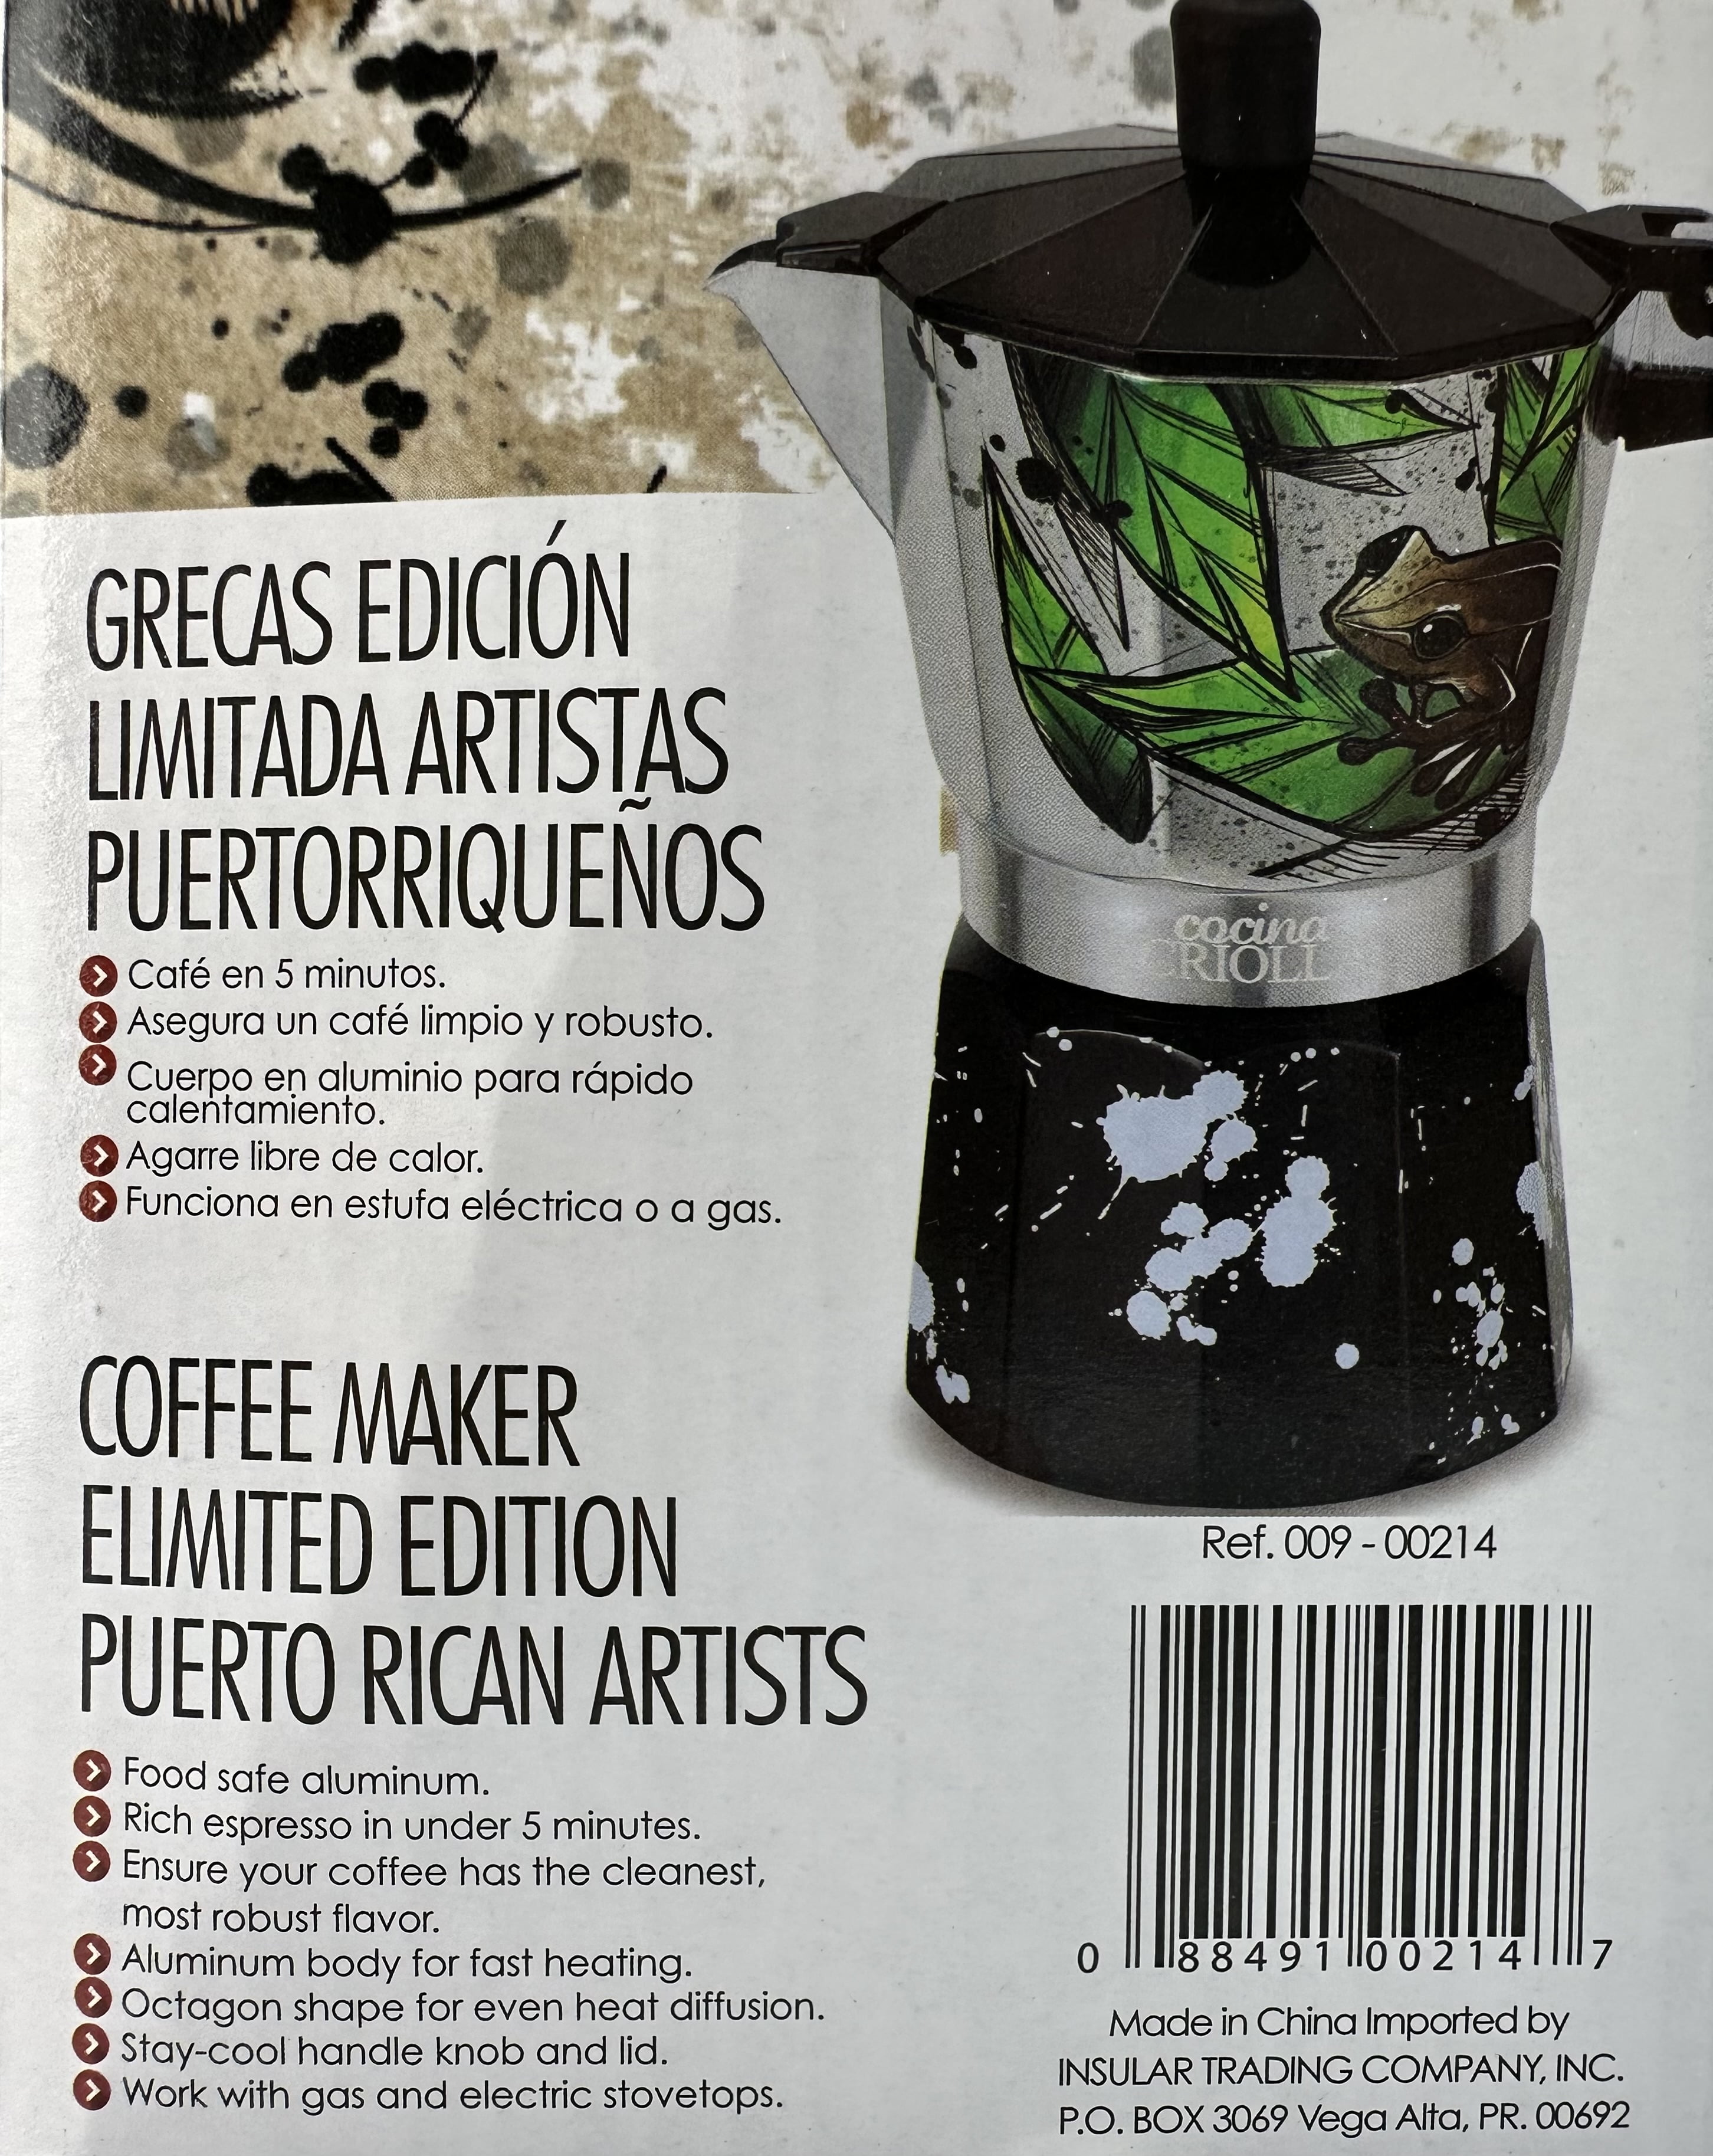  El Pantry Limited Edition Puerto Rican Artists Coffee